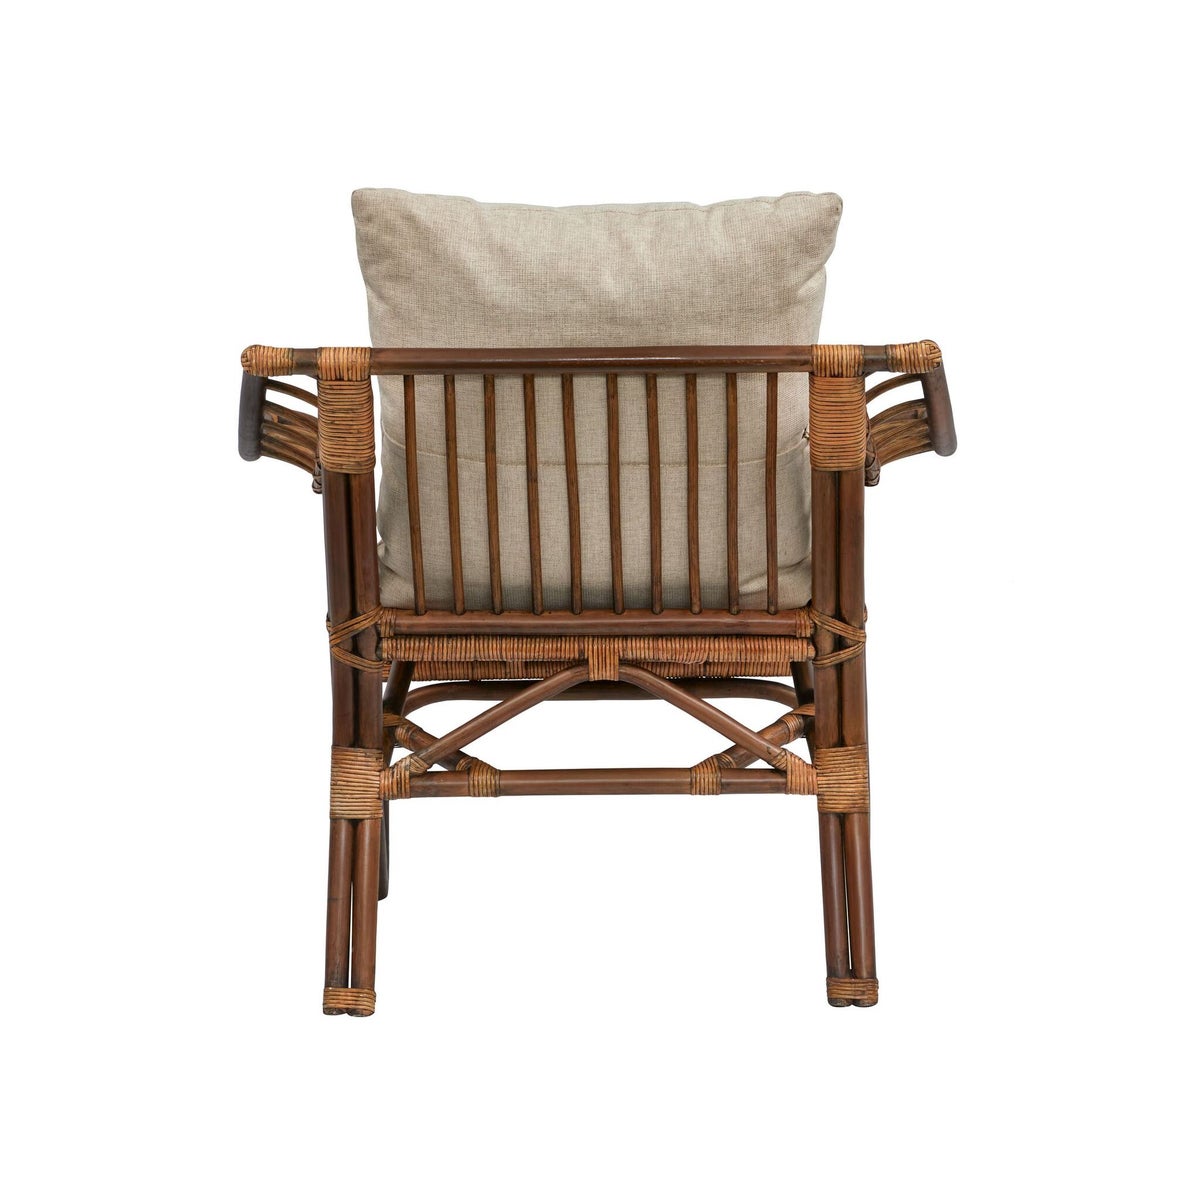 Sensation Chair  Frame Color  - Ginger   Cushion Color - Cream   Jarrett Bay CollectionThis It